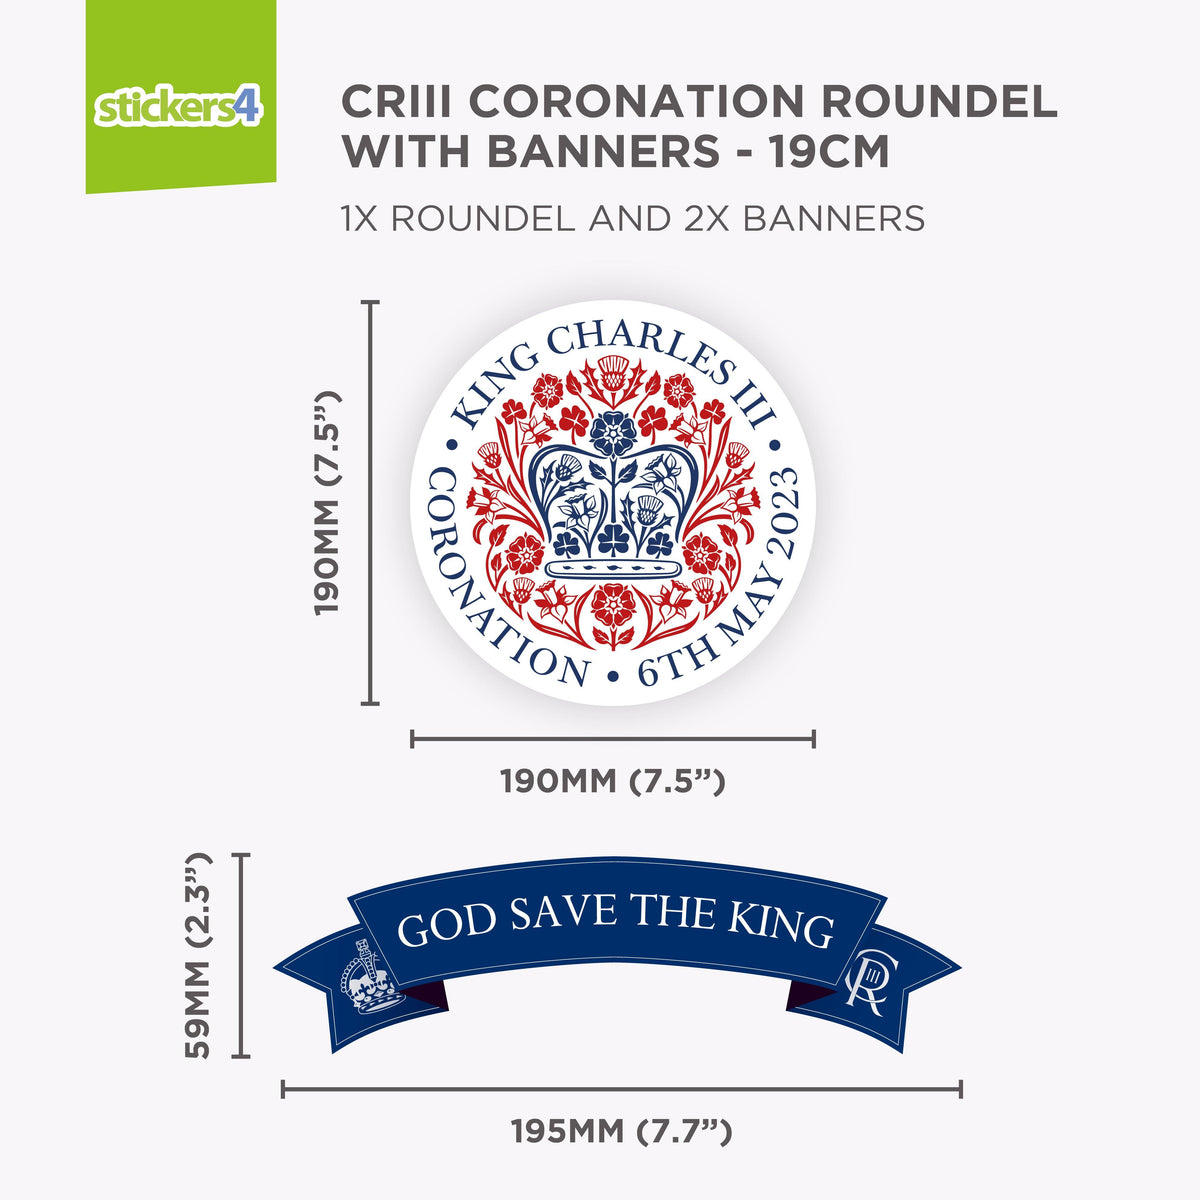 King Charles III Coronation Window Sticker Decoration - Official Logo Emblem Roundel with Banners Retail Window Display